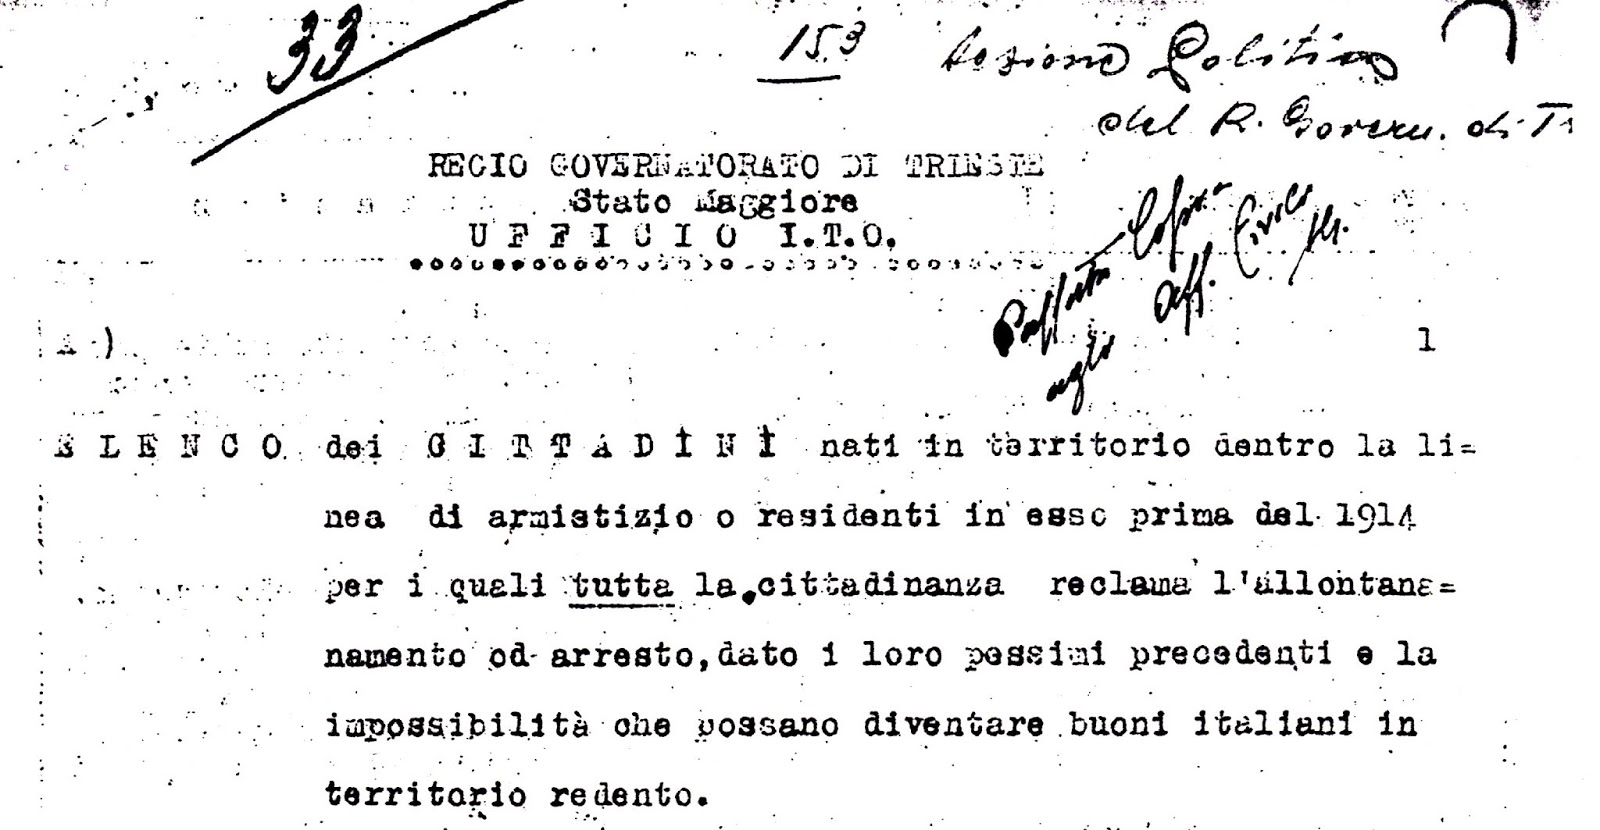 TRIESTE, DECEMBER 1918, OPERATION PURGE: REMOVING THE "BAD" ITALIANS FROM TRIESTE